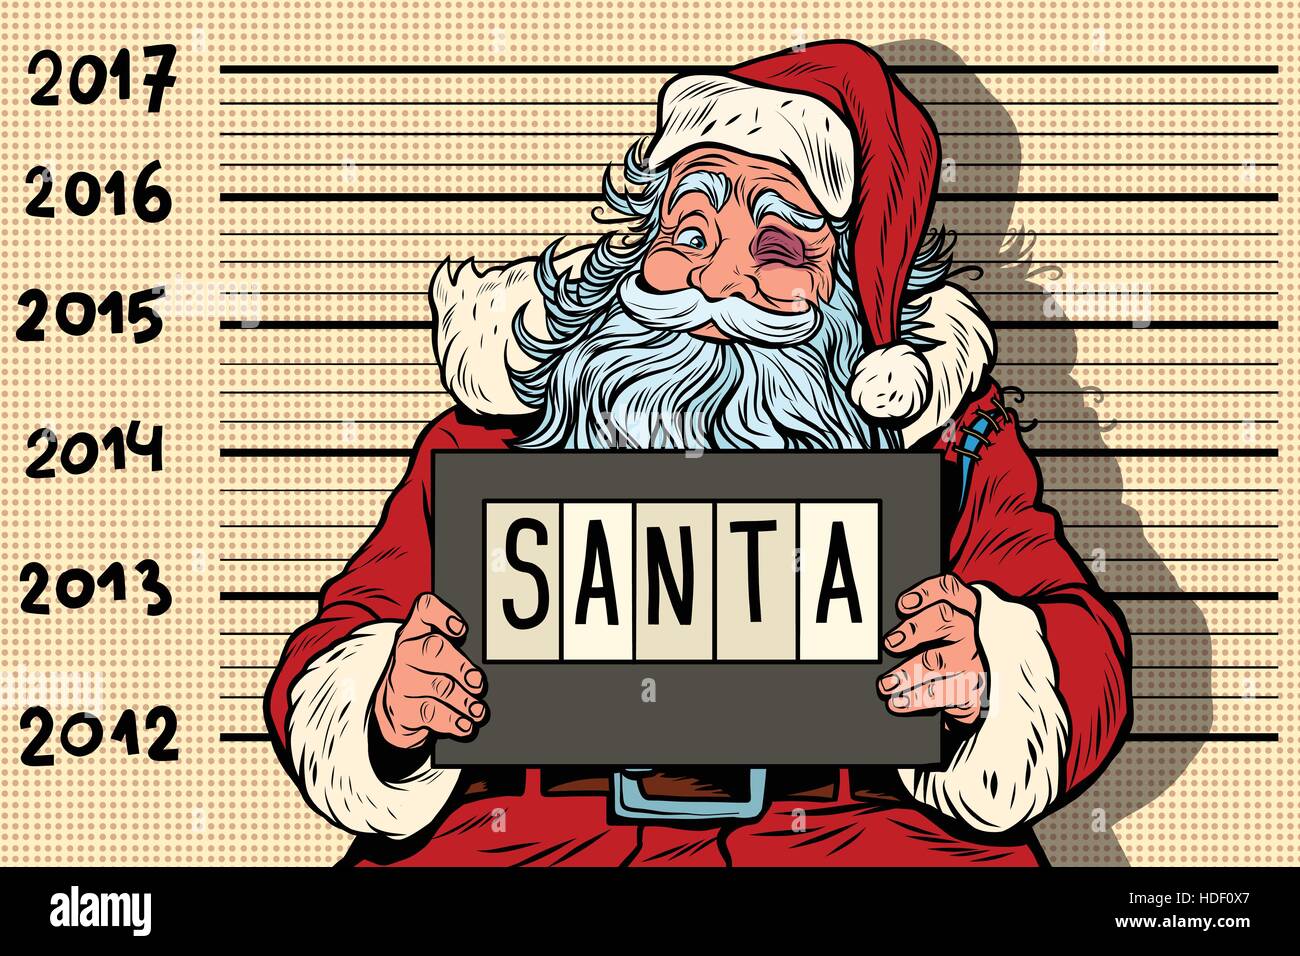 Criminal Santa Claus arrested, 2017 New year Stock Vector